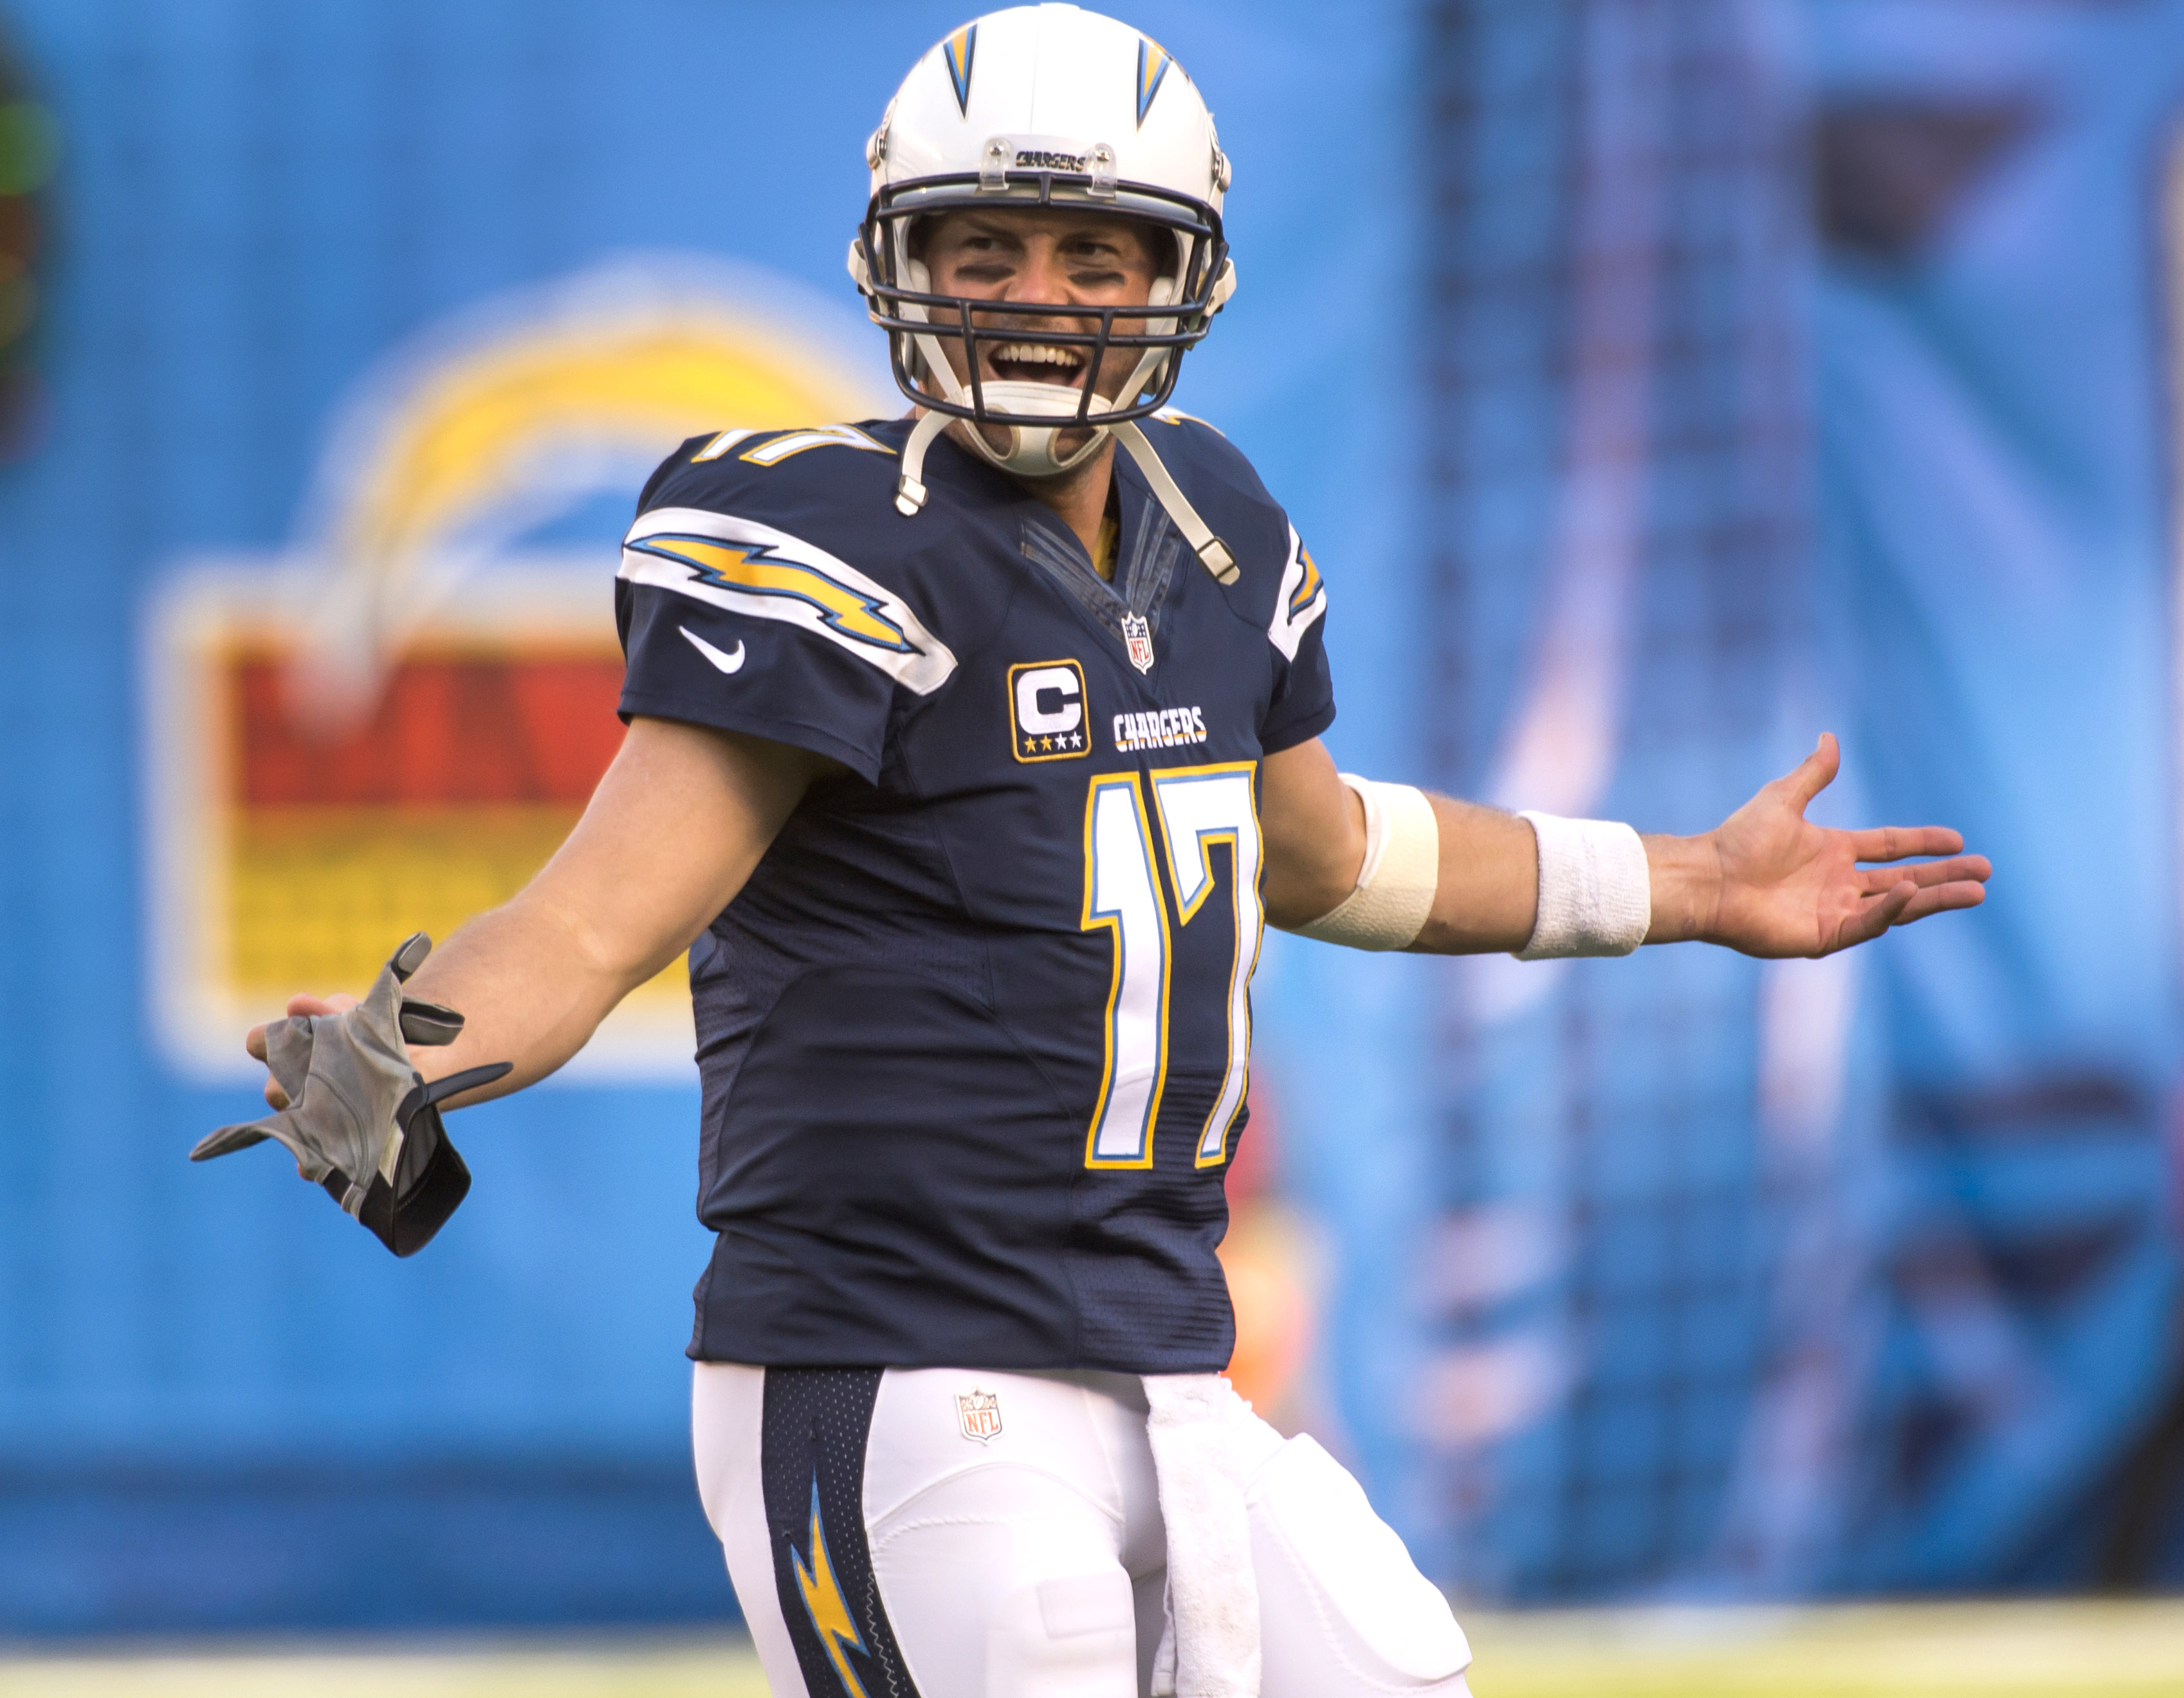 Philip Rivers is entering his 12th year in San Diego. Will there be a 13th? (Robert Hanashiro, USA TODAY Sports)